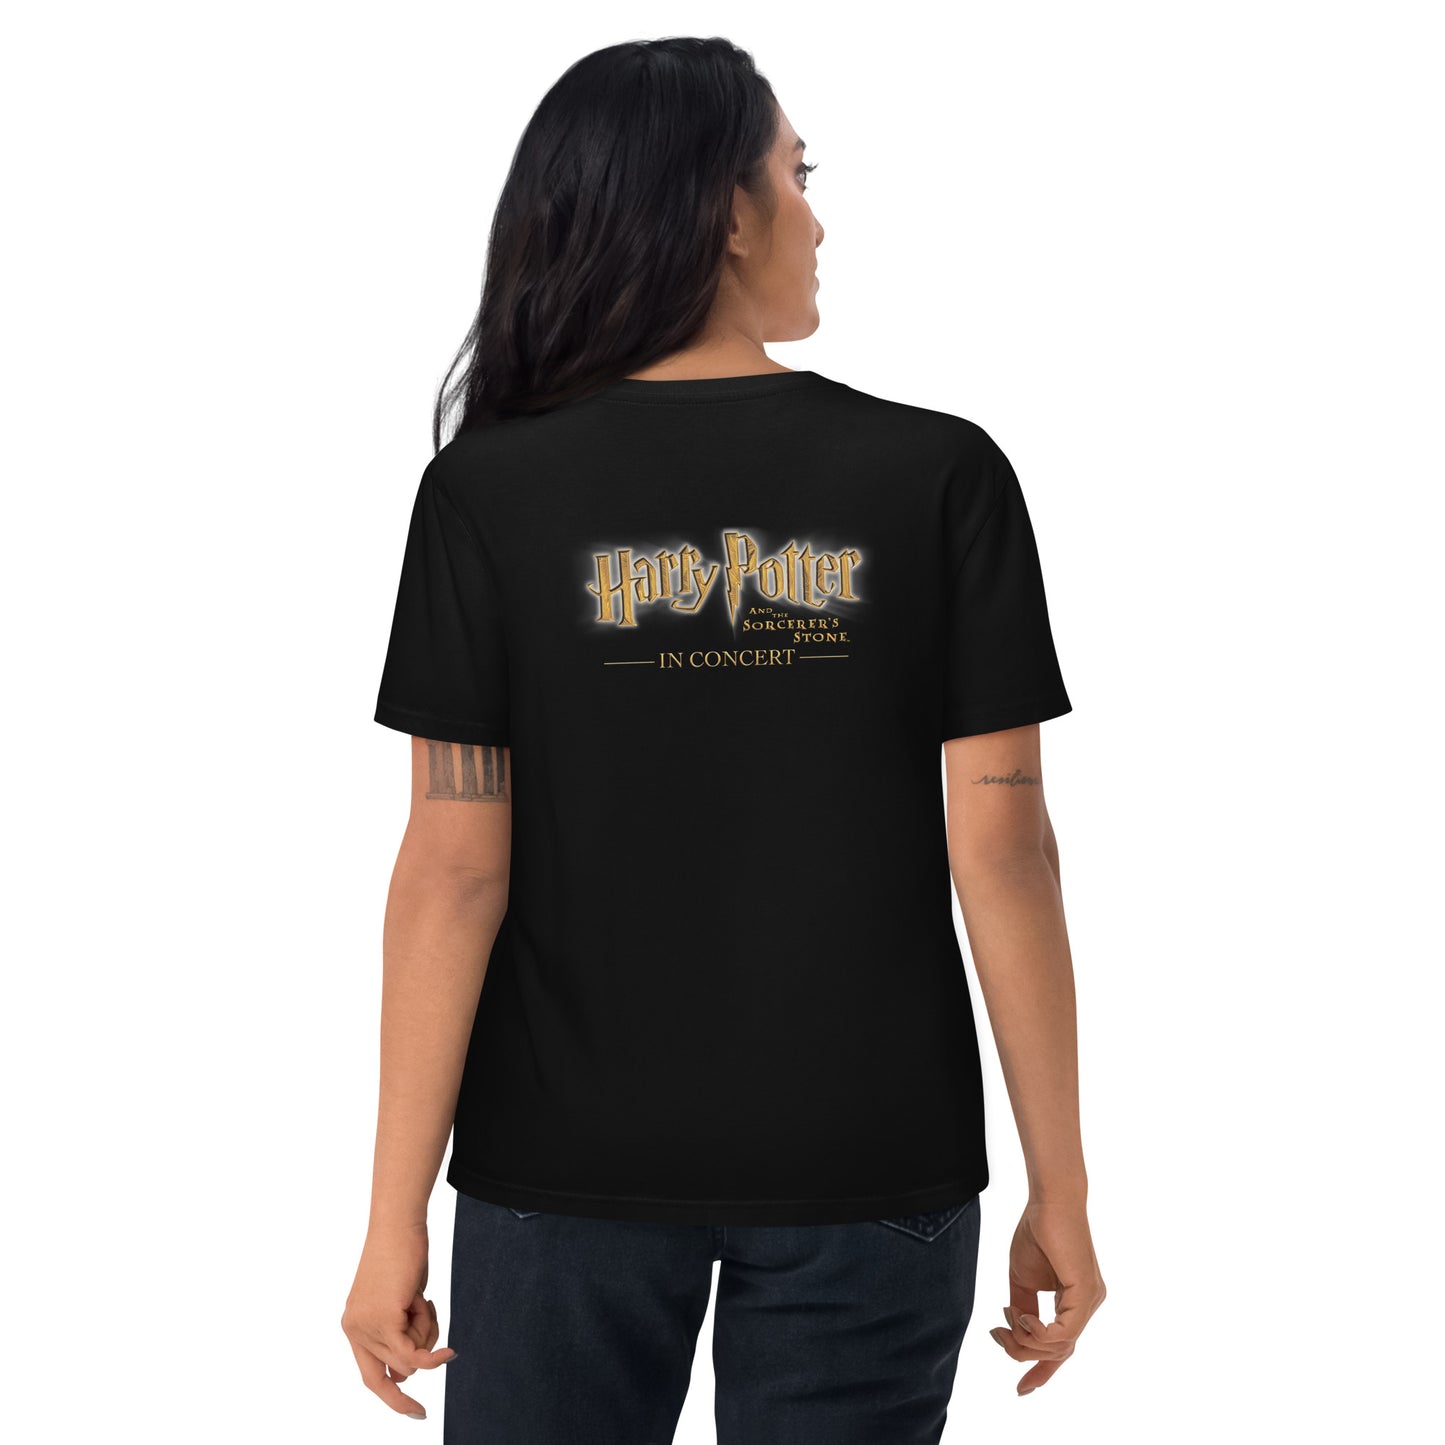 Unisex organic cotton Harry Potter and the Sorcerer's Stone™ in Concert T-Shirt